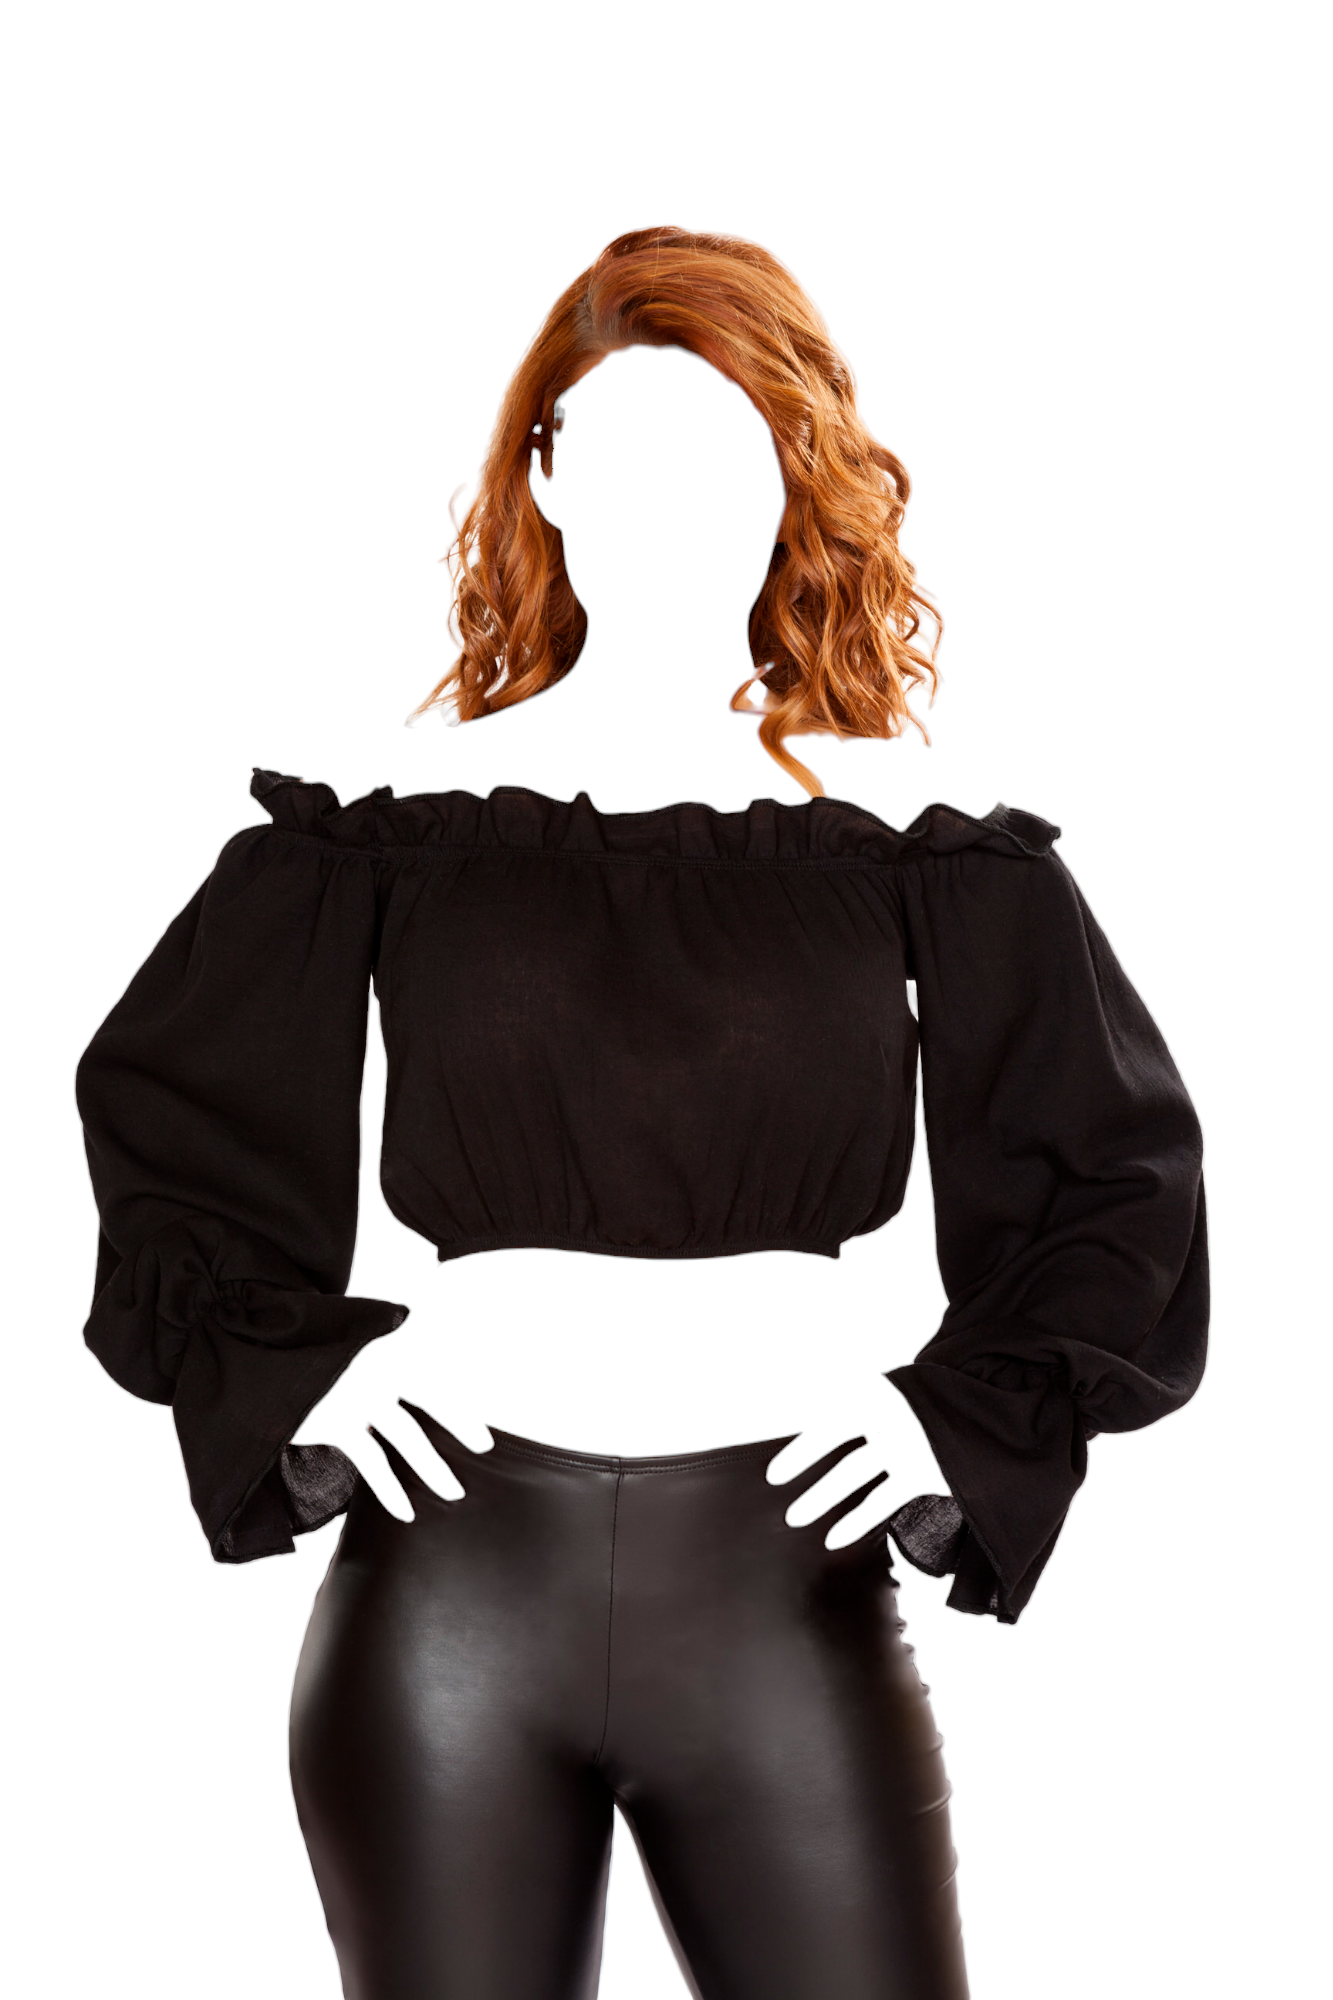 Roma Costume Ruffled Pirate Tube Top with Sleeves Black